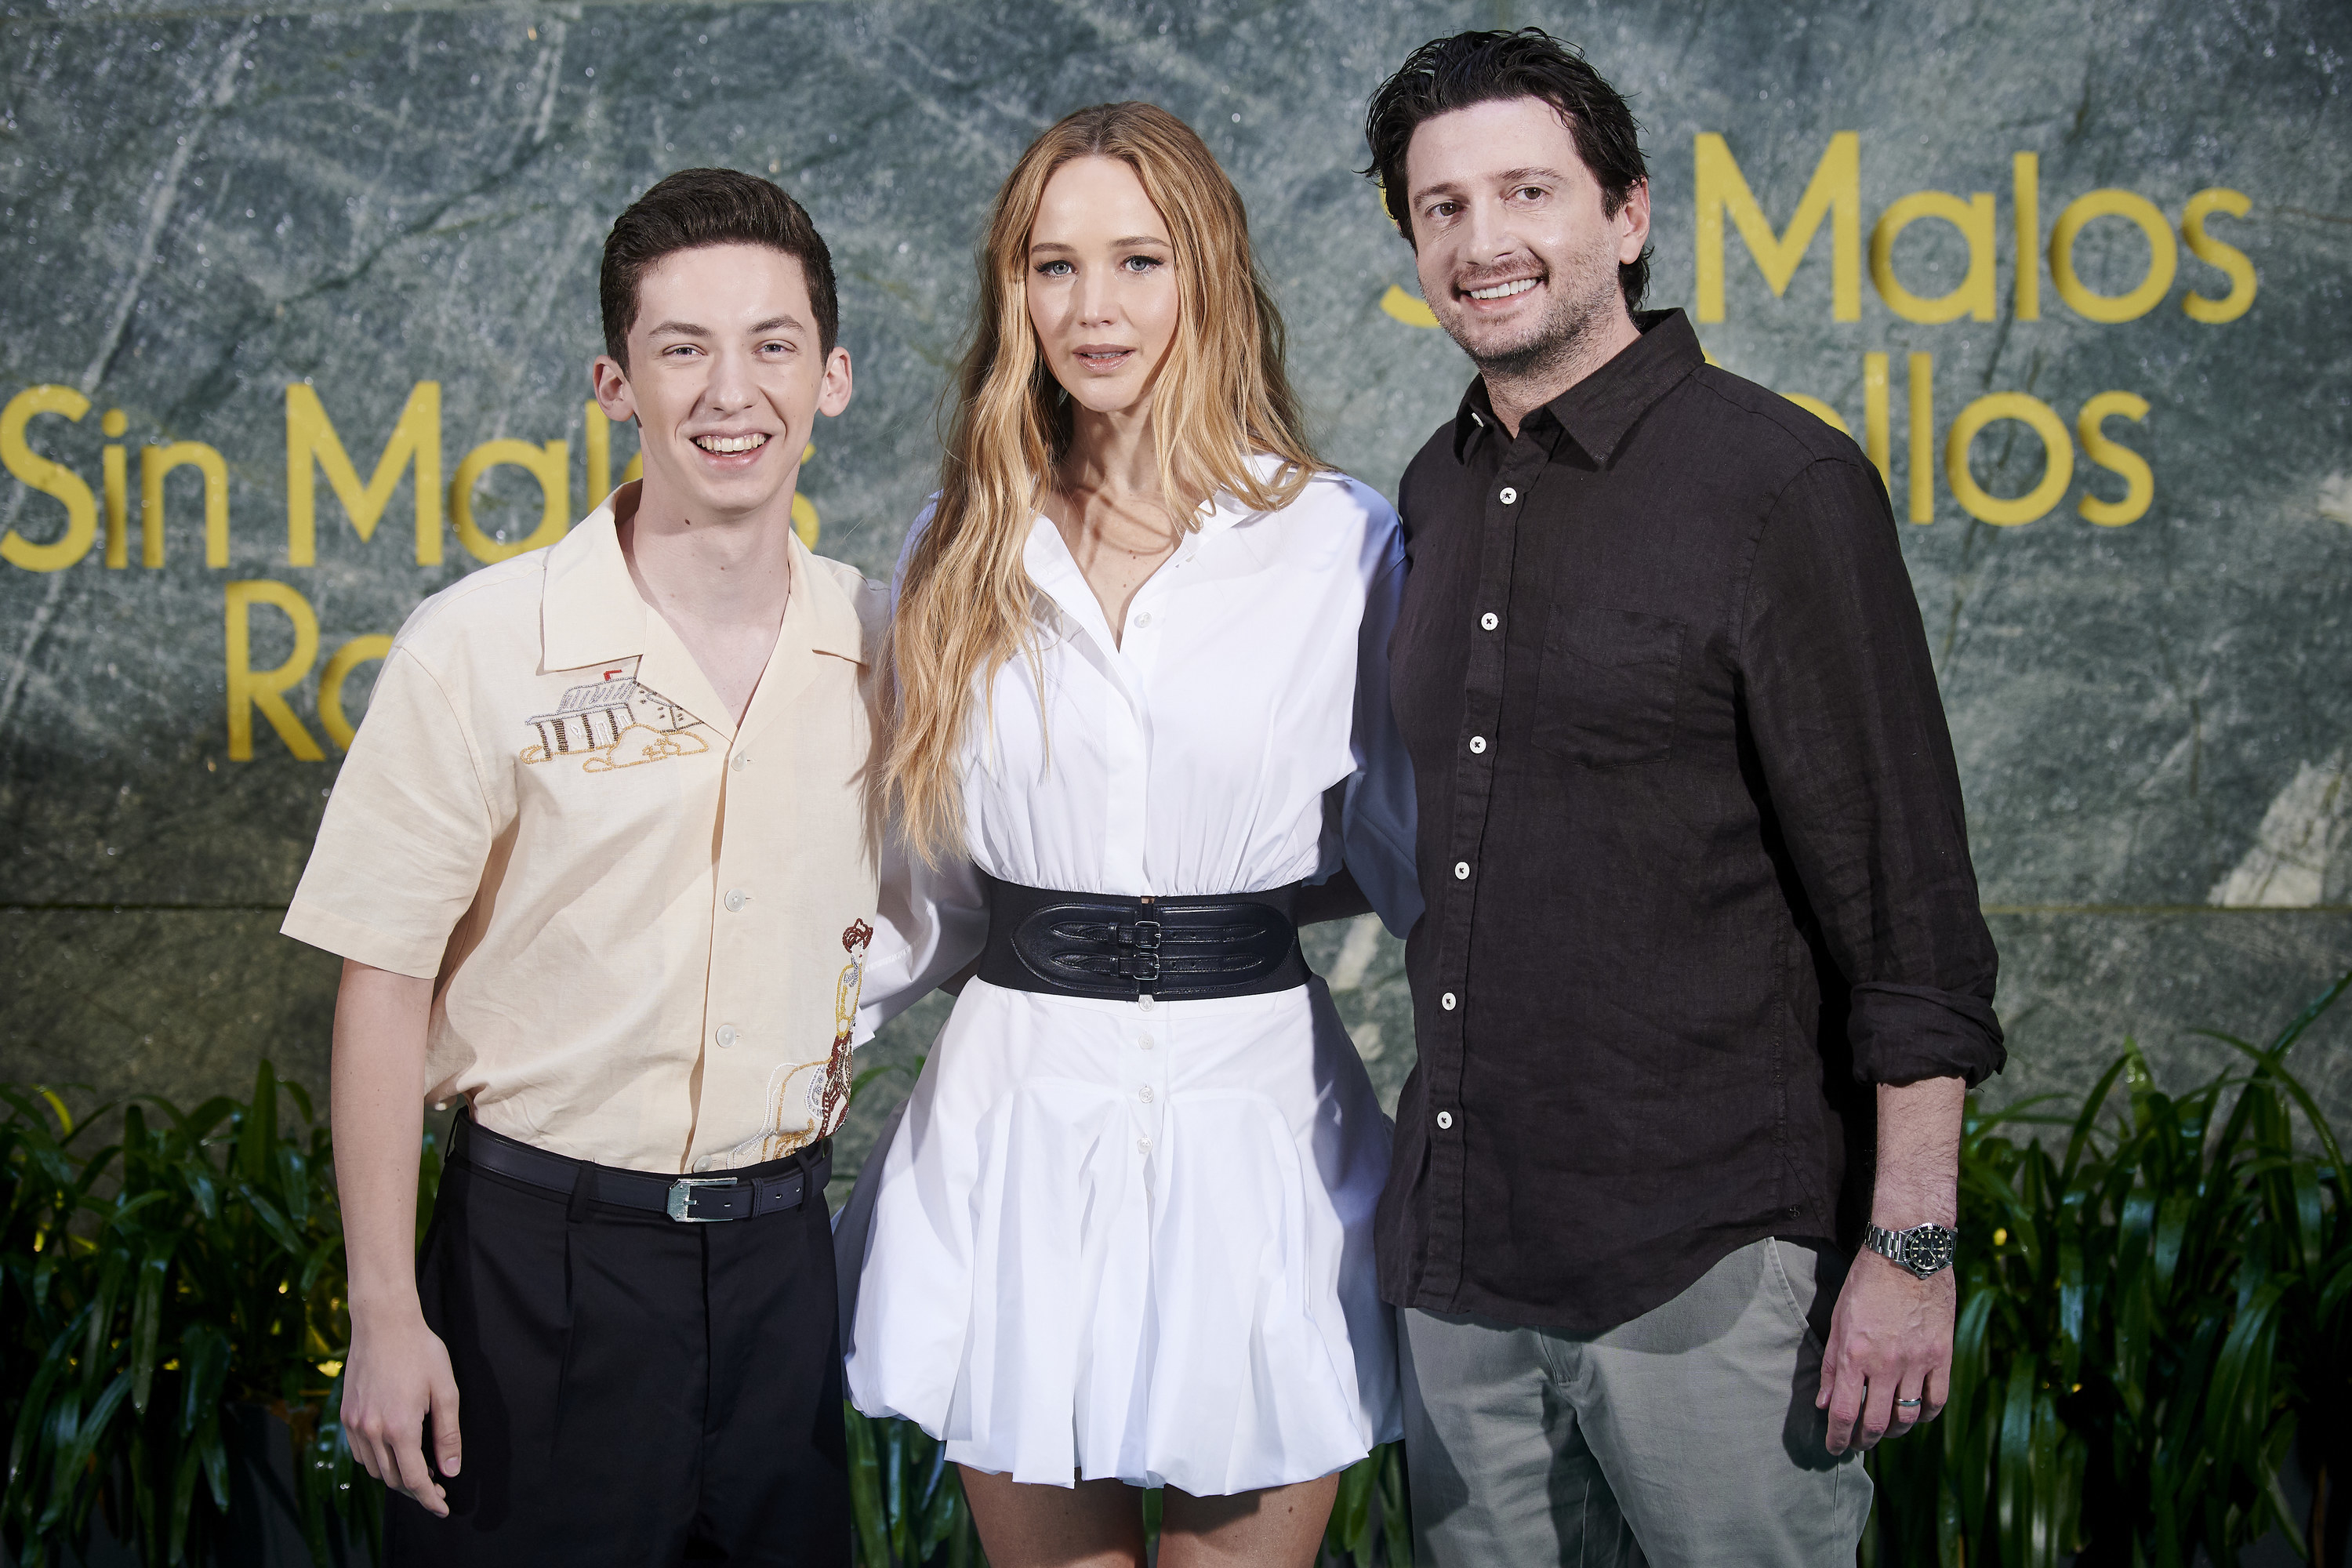 Andrew, Jennifer, and Gene at a media event